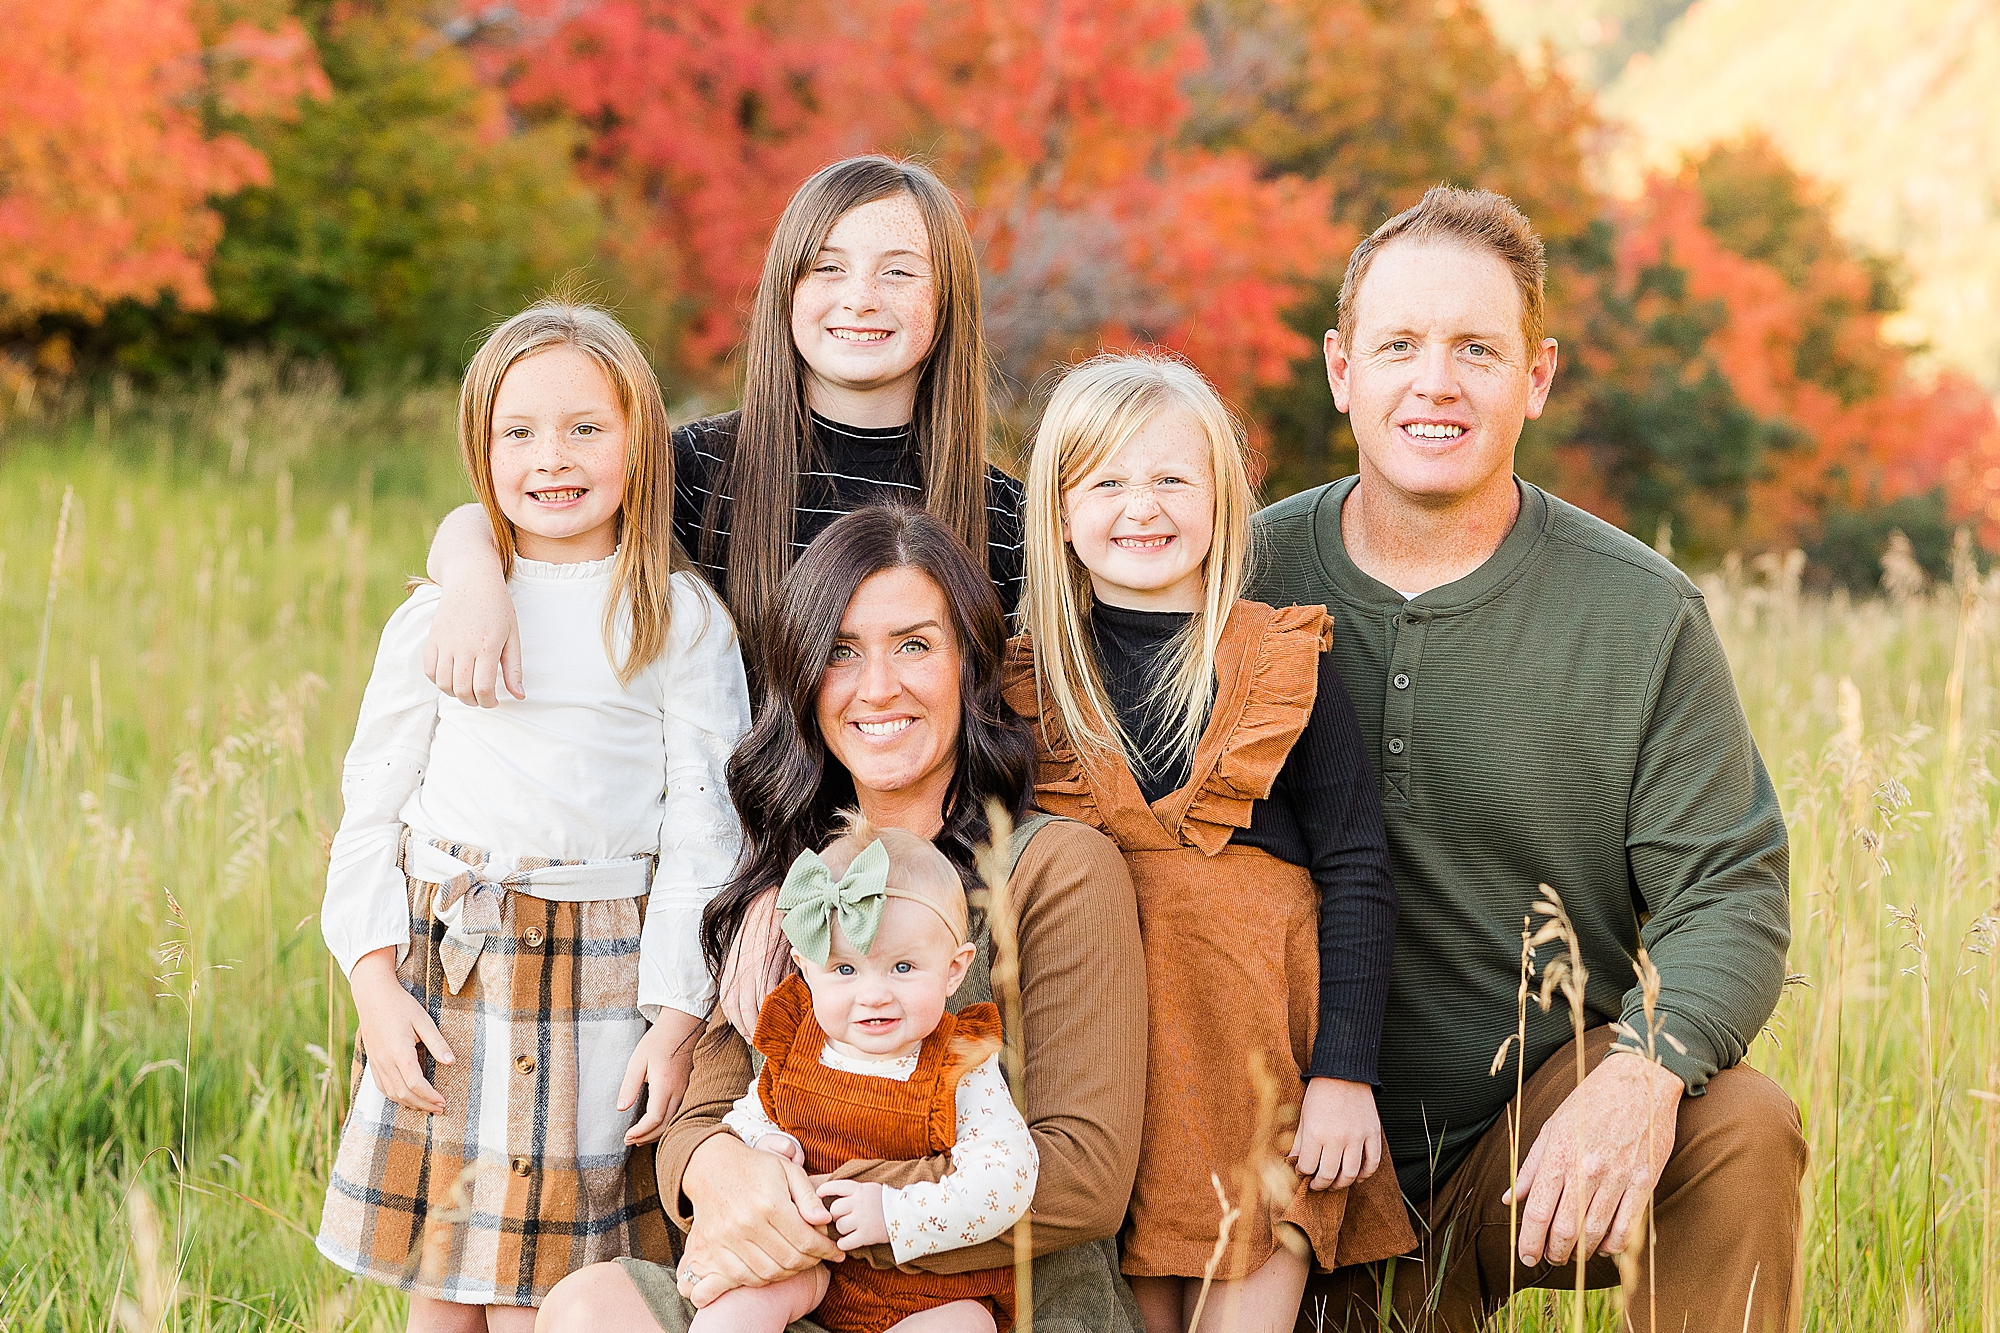 A happy family, all dressed in warm autumn colors, gathered in front of the Utah mountains.